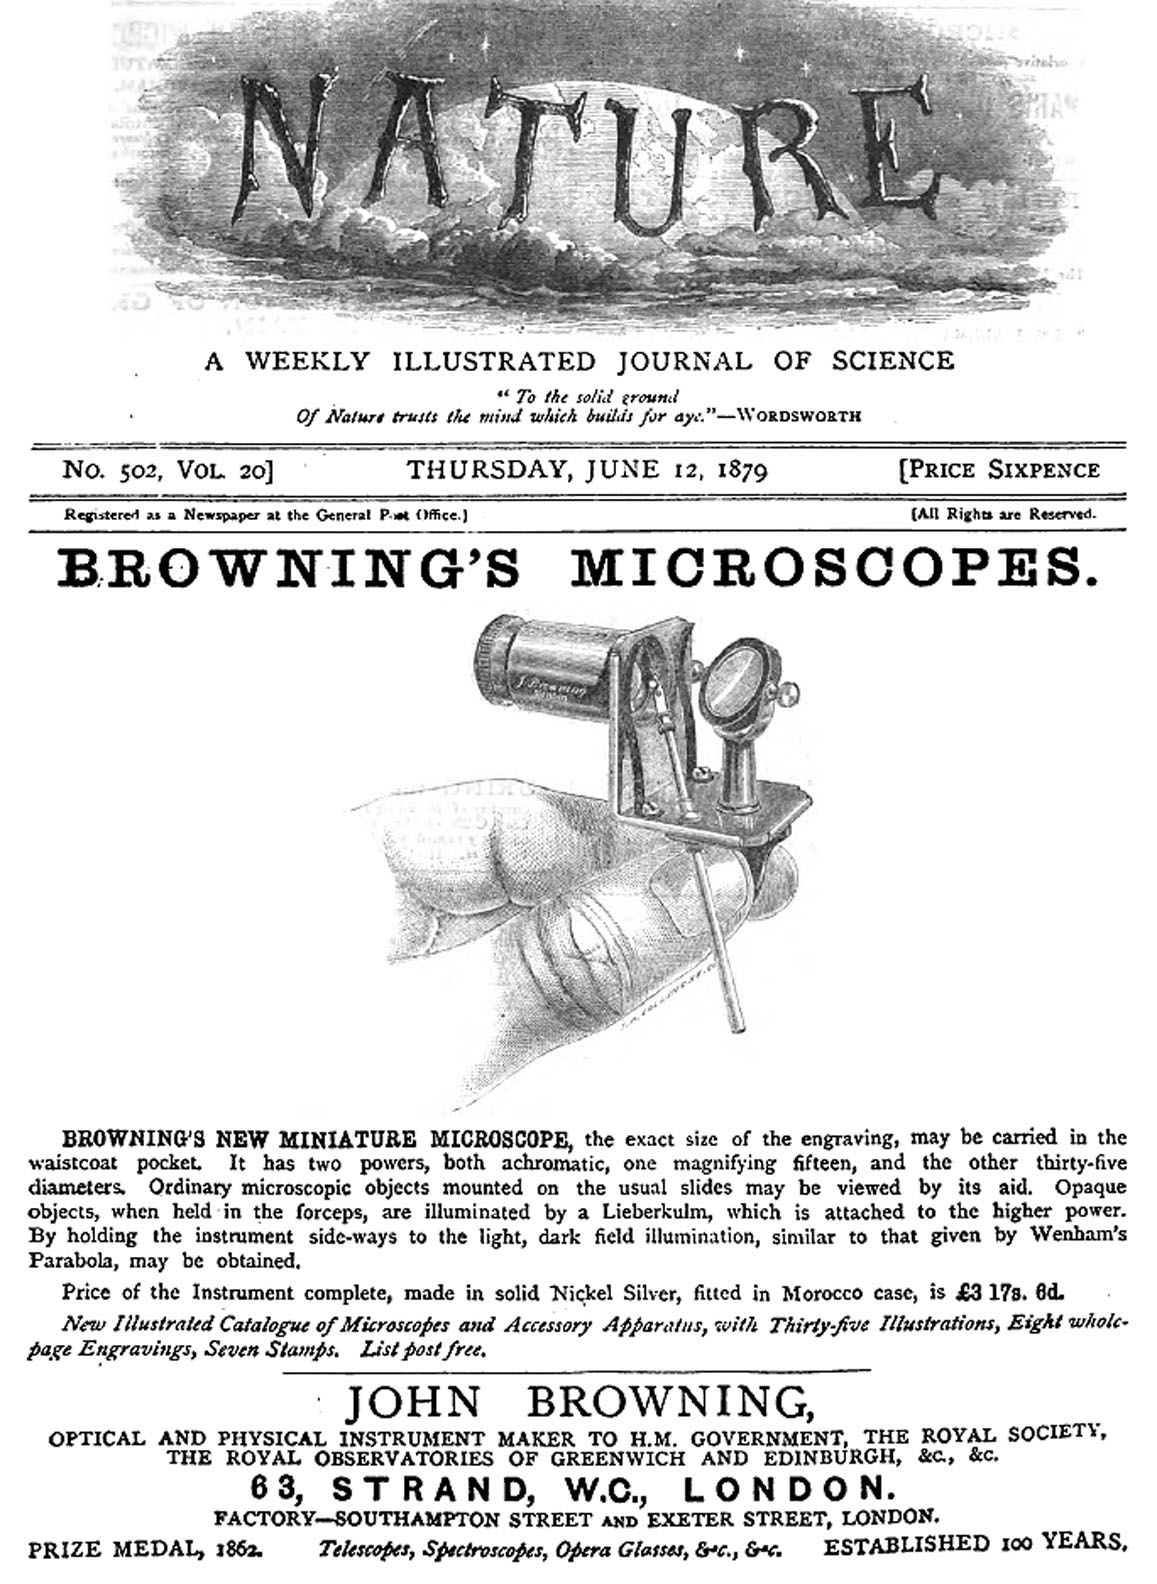 Browning 
Ad from Nature 1879